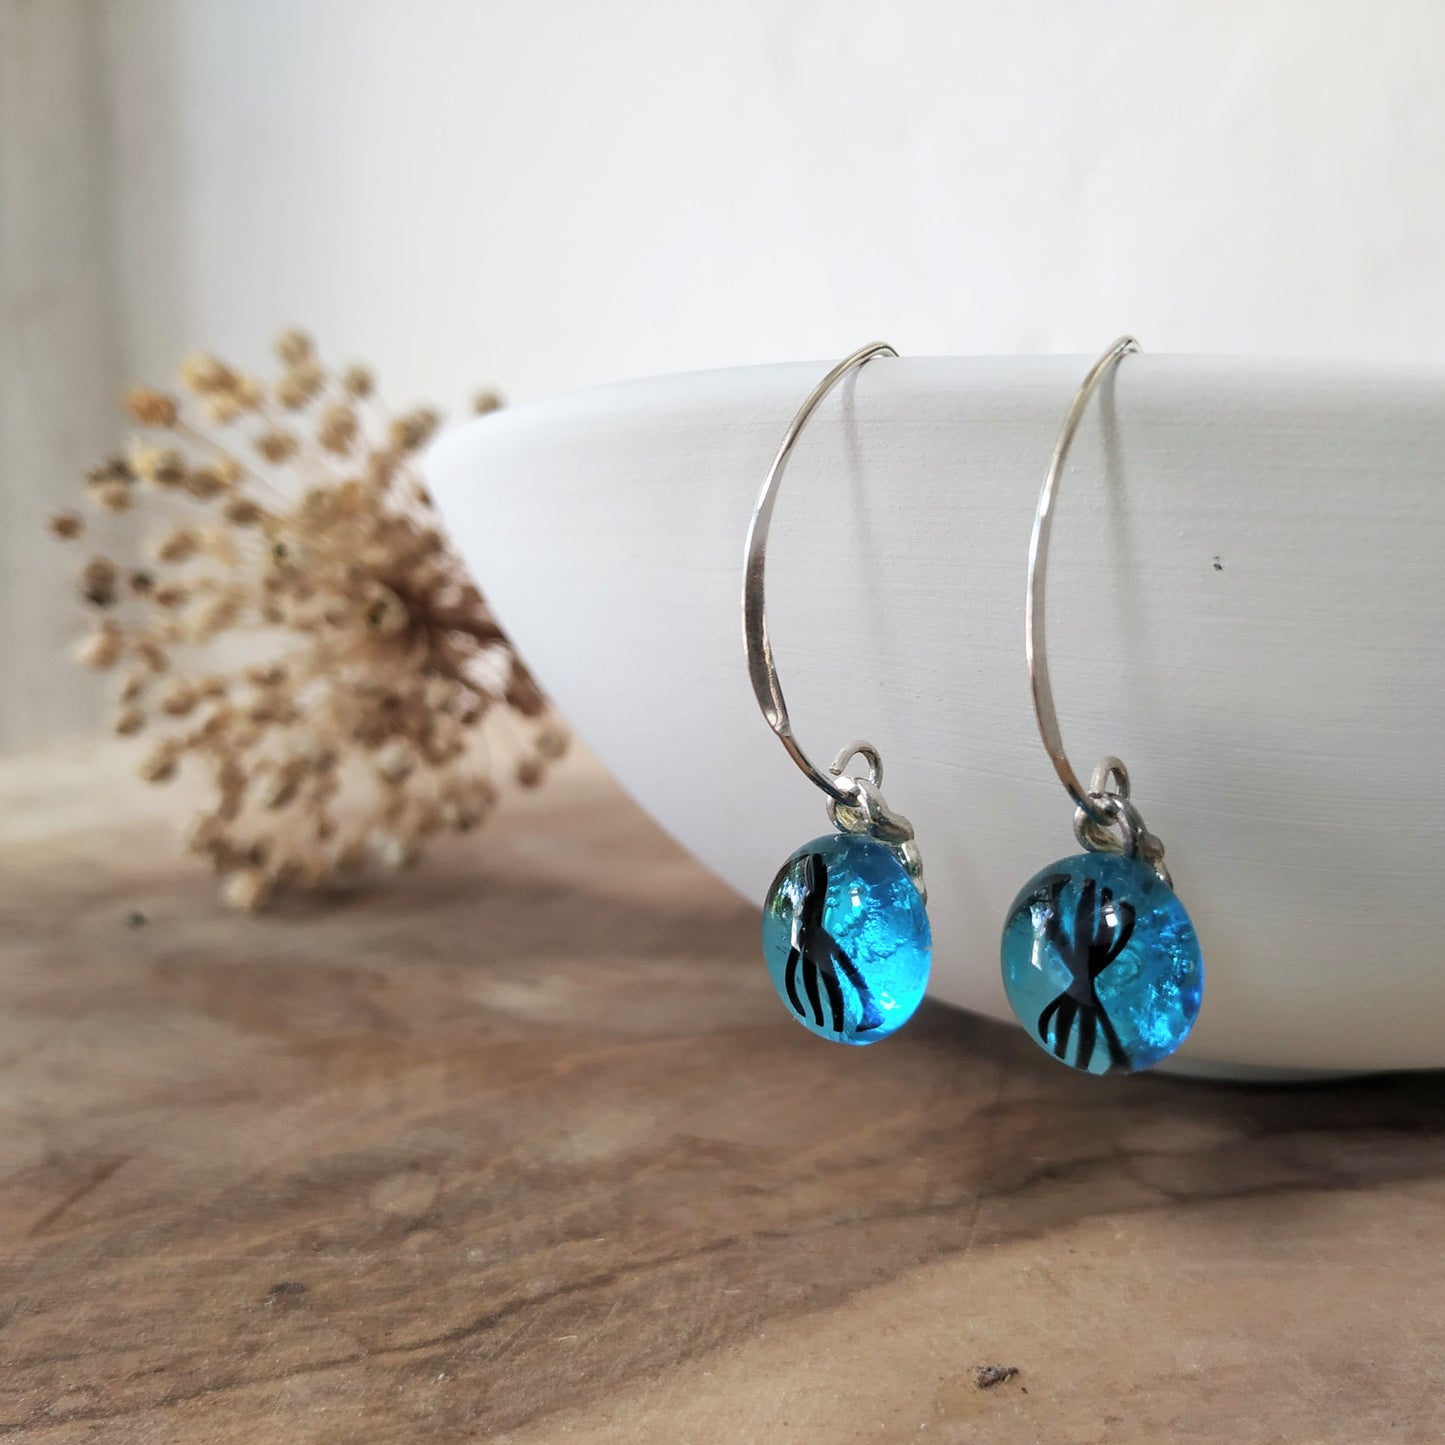 925 silver and blue glass earrings with black details